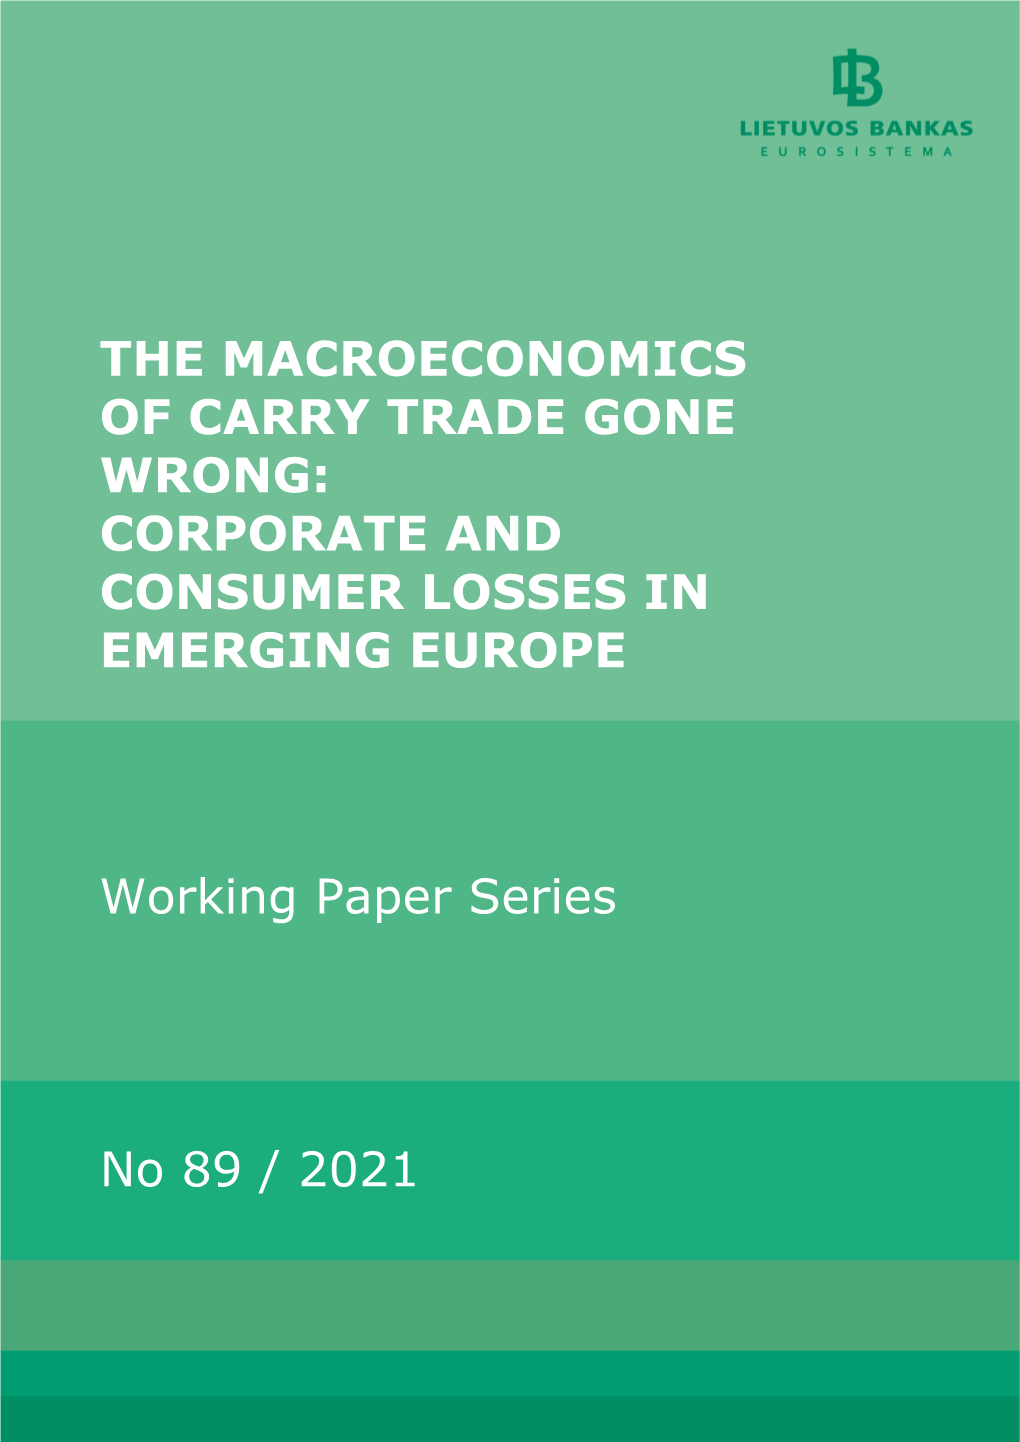 The Macroeconomics of Carry Trade Gone Wrong: Corporate and Consumer Losses in Emerging Europe